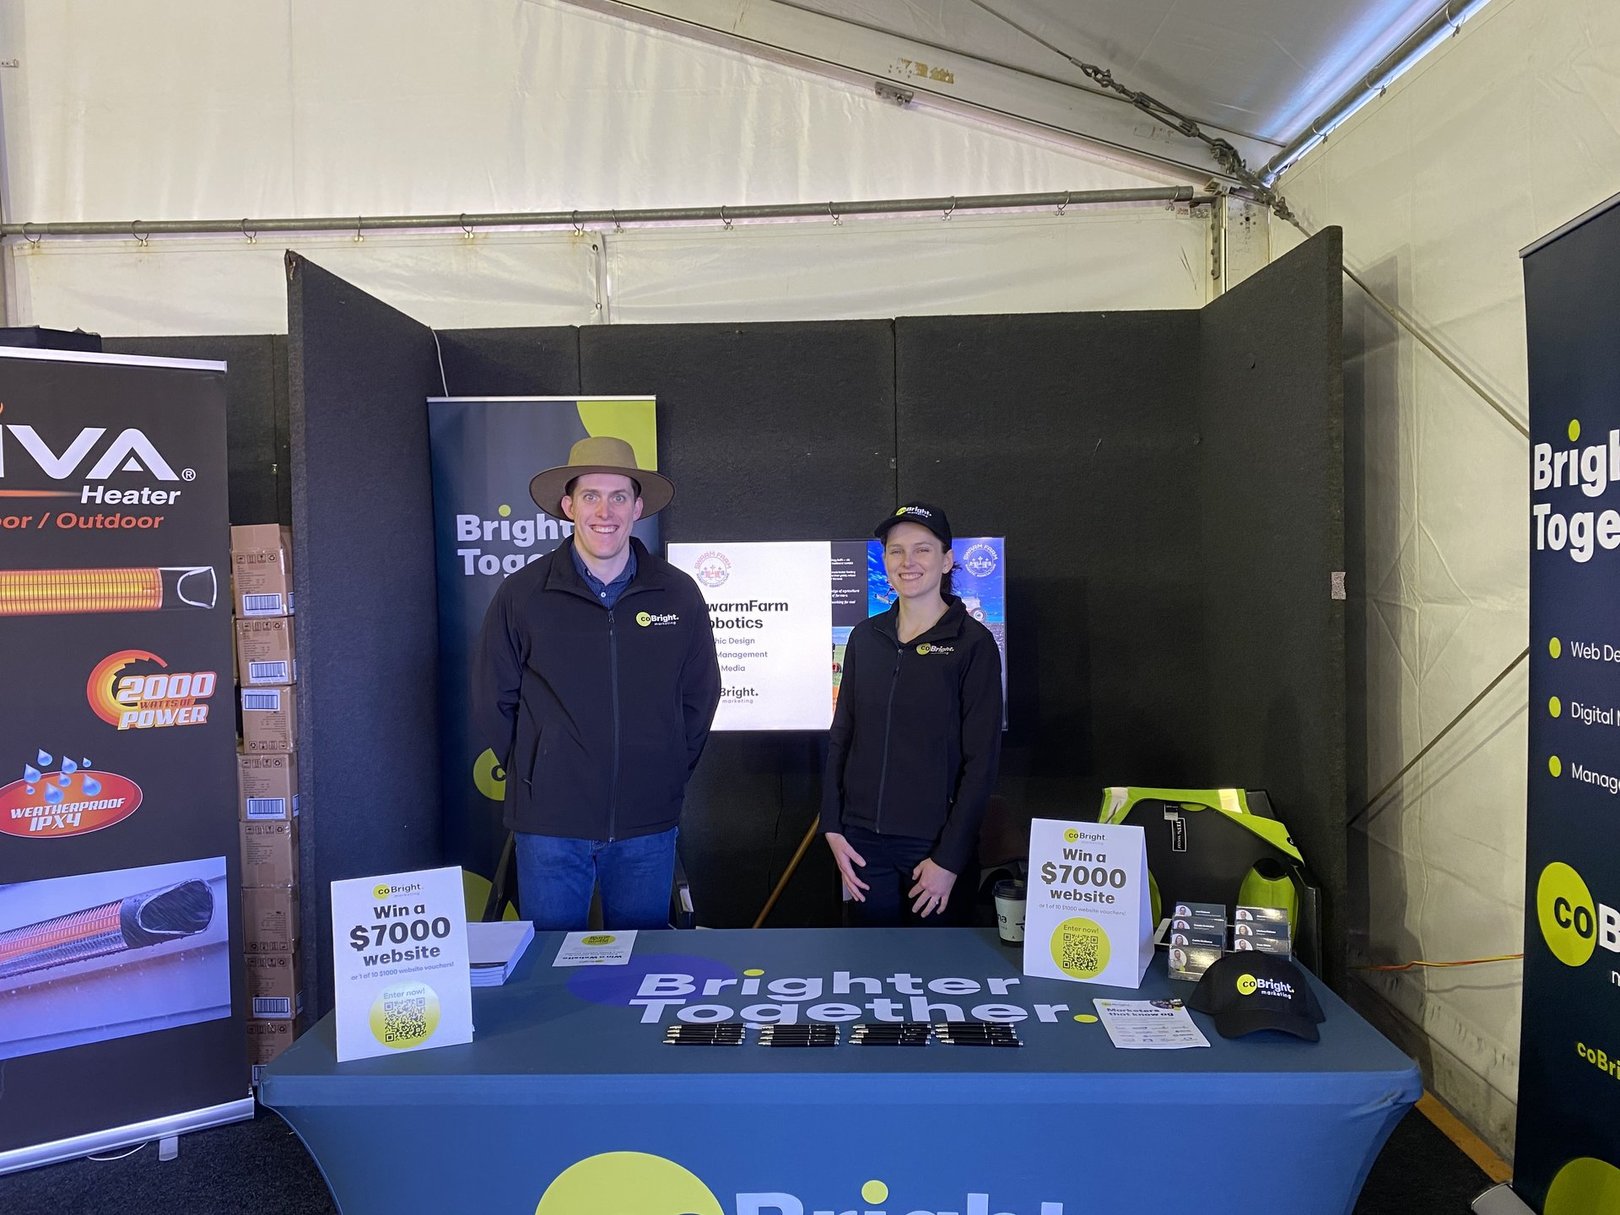 CoBright members stand in the CoBright stall at the FarmFest Event